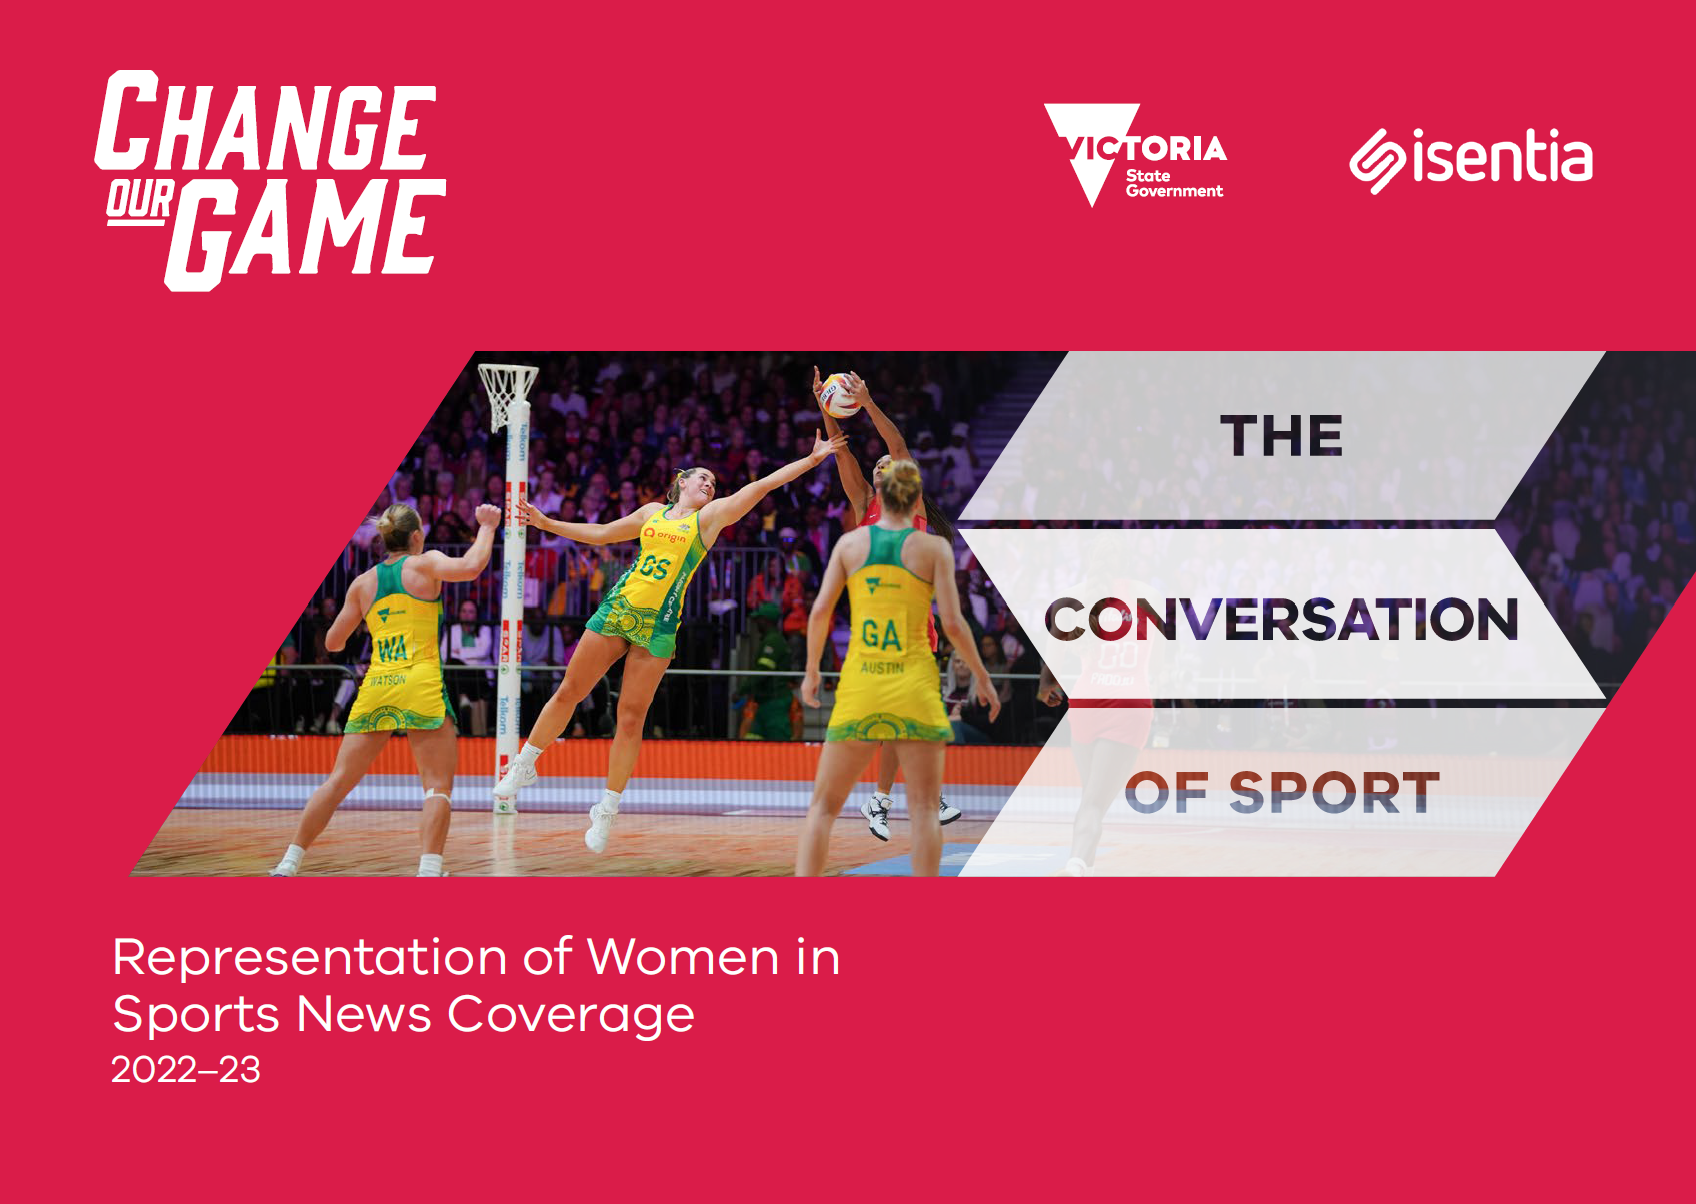 The Conversation of Sport - Are Women Visible in Sports News Coverage?